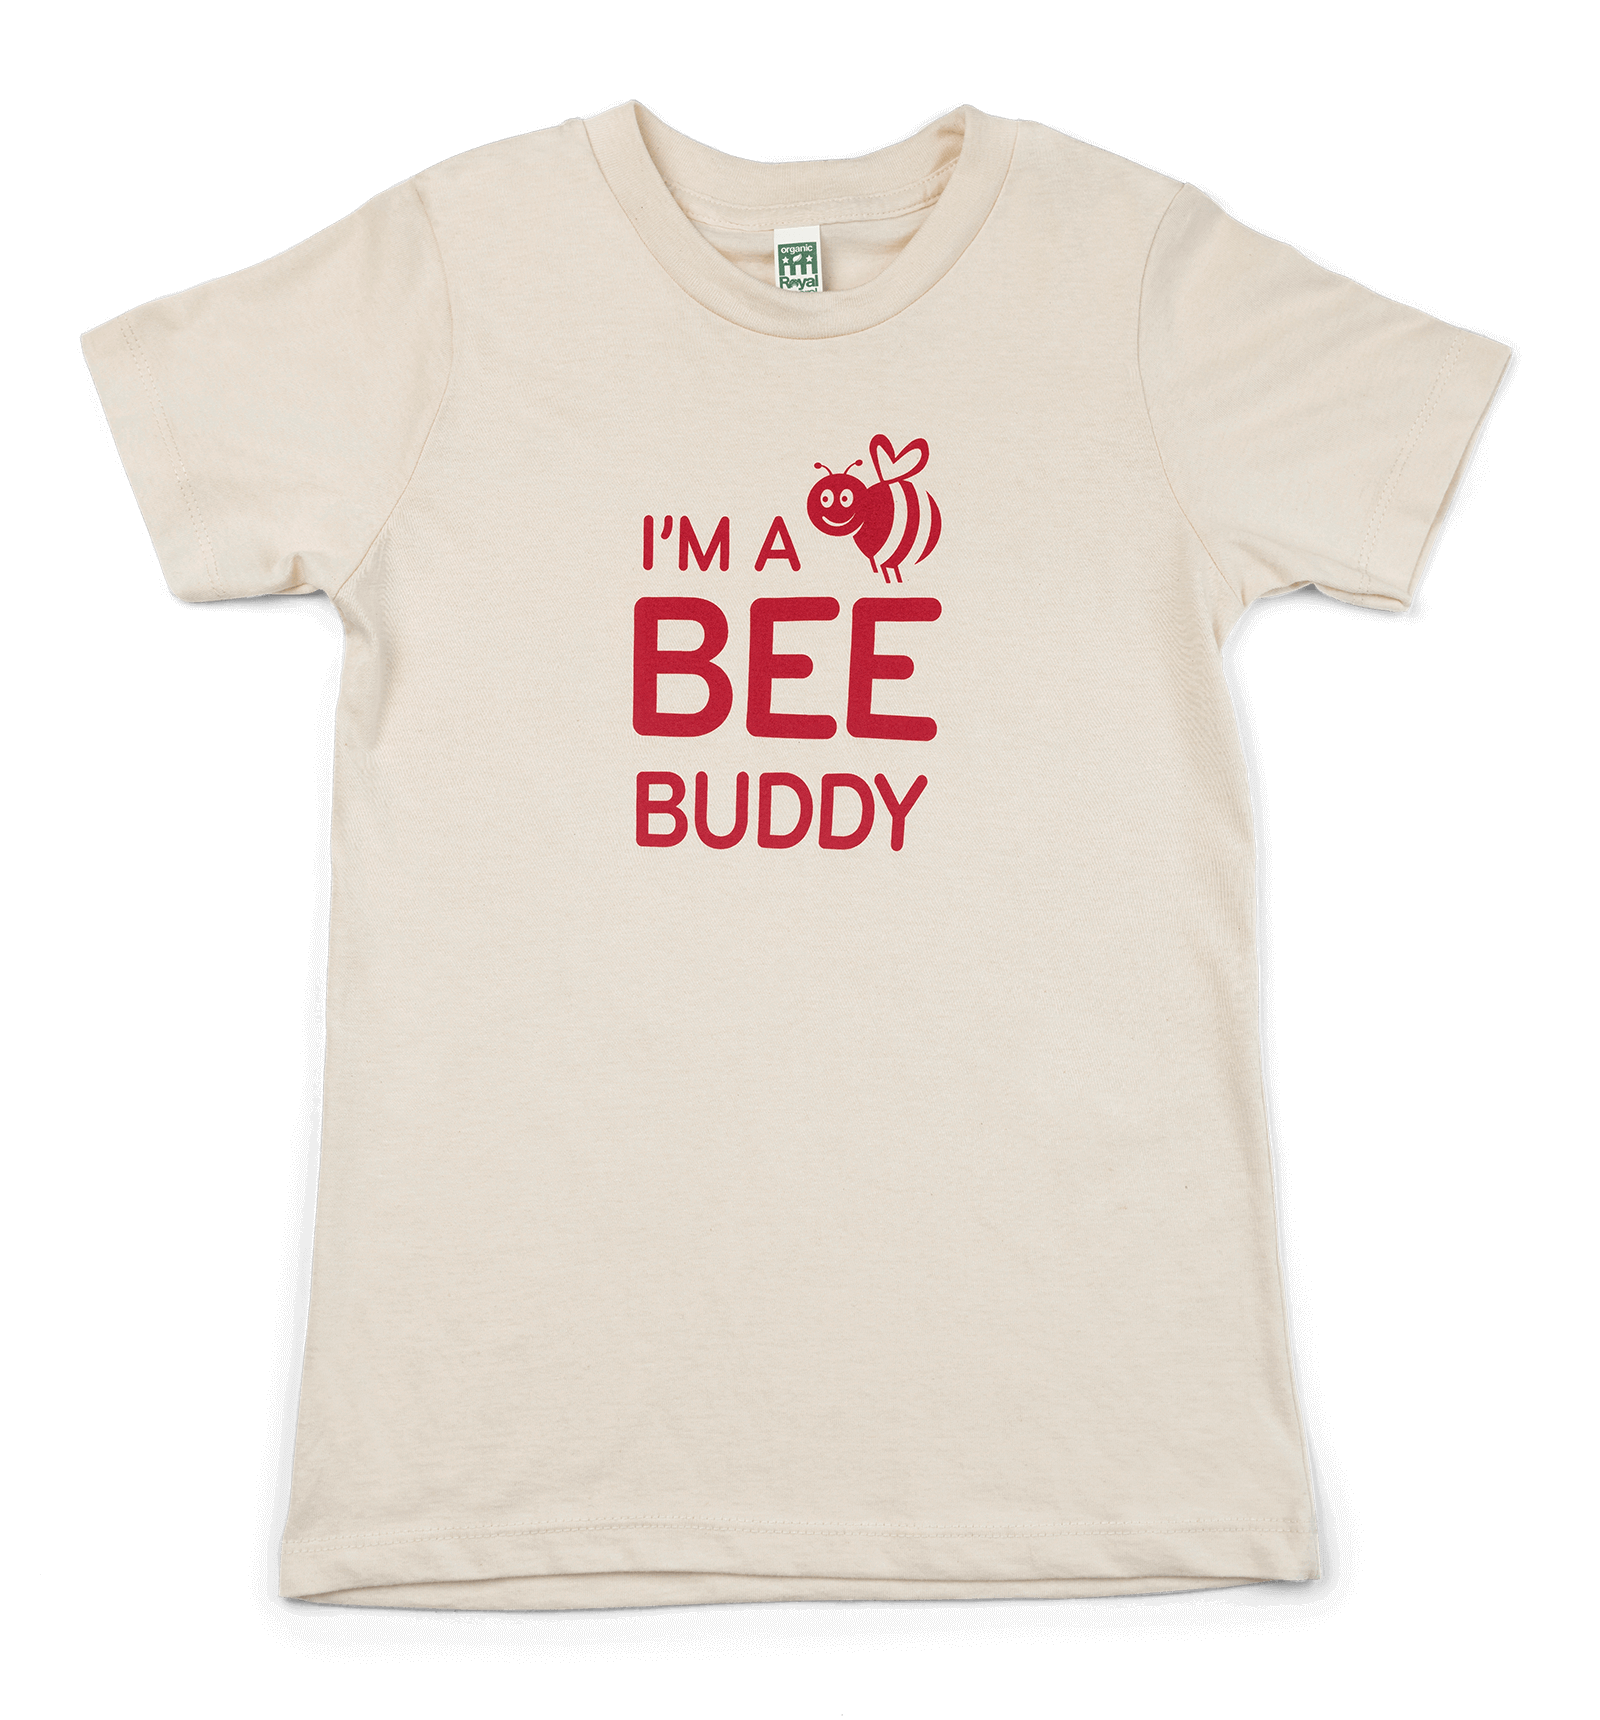 I'm a Bee Buddy Kids T-shirt with Bee Icon